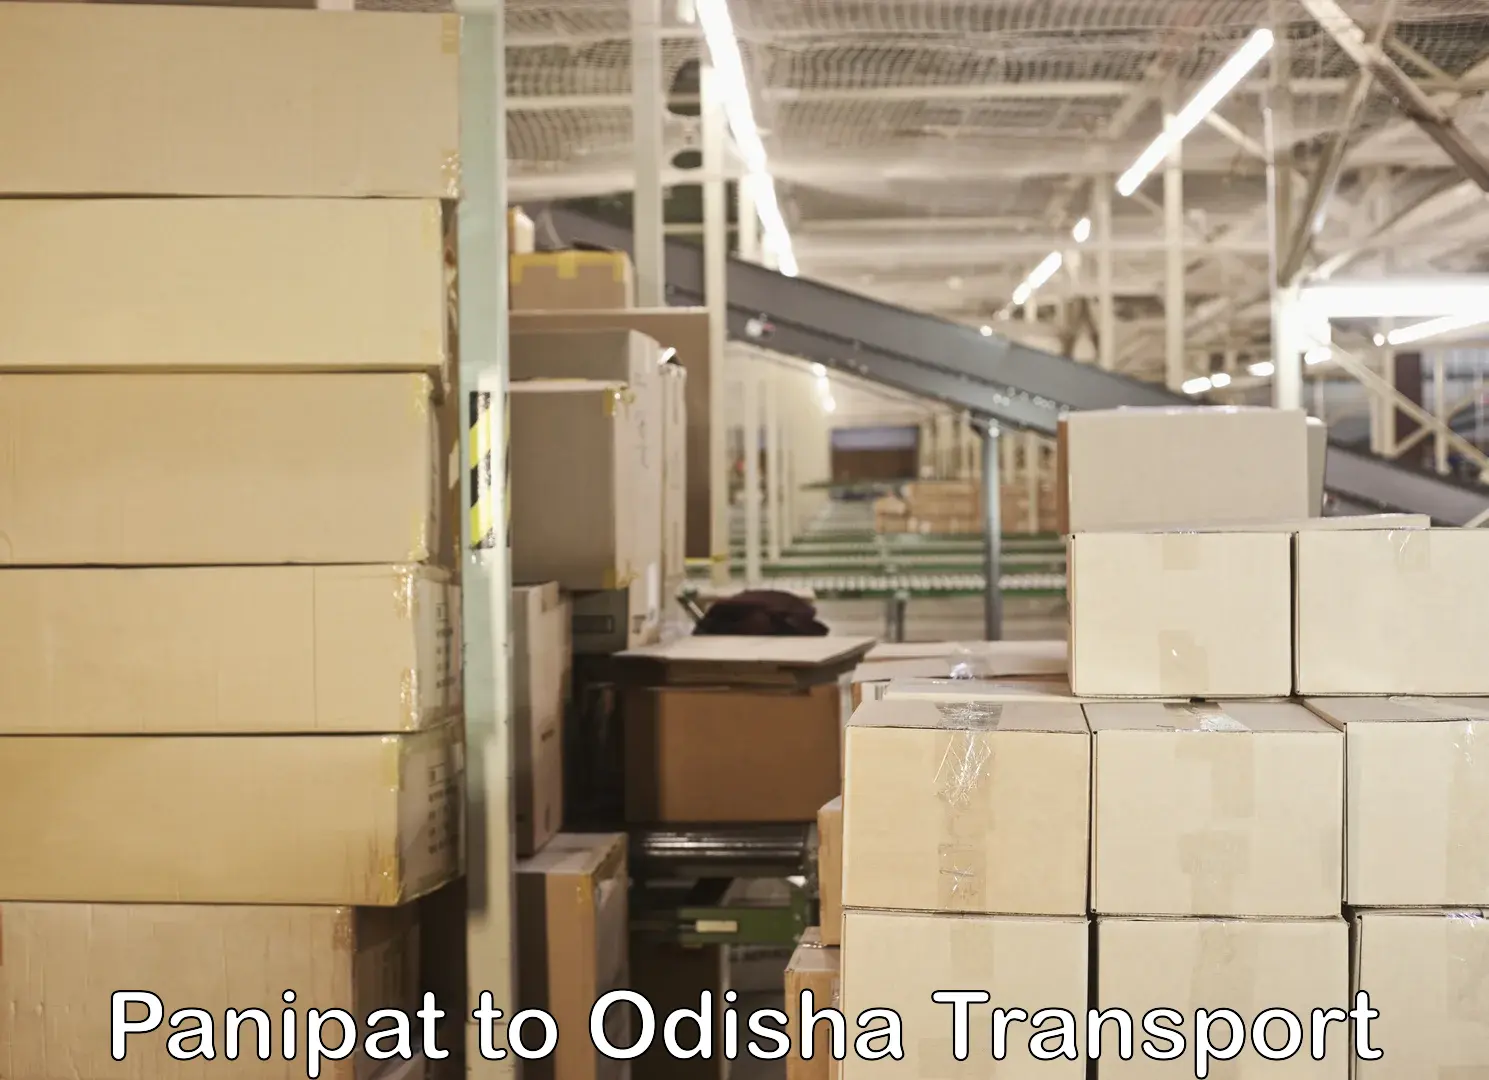 Transport shared services in Panipat to Odisha